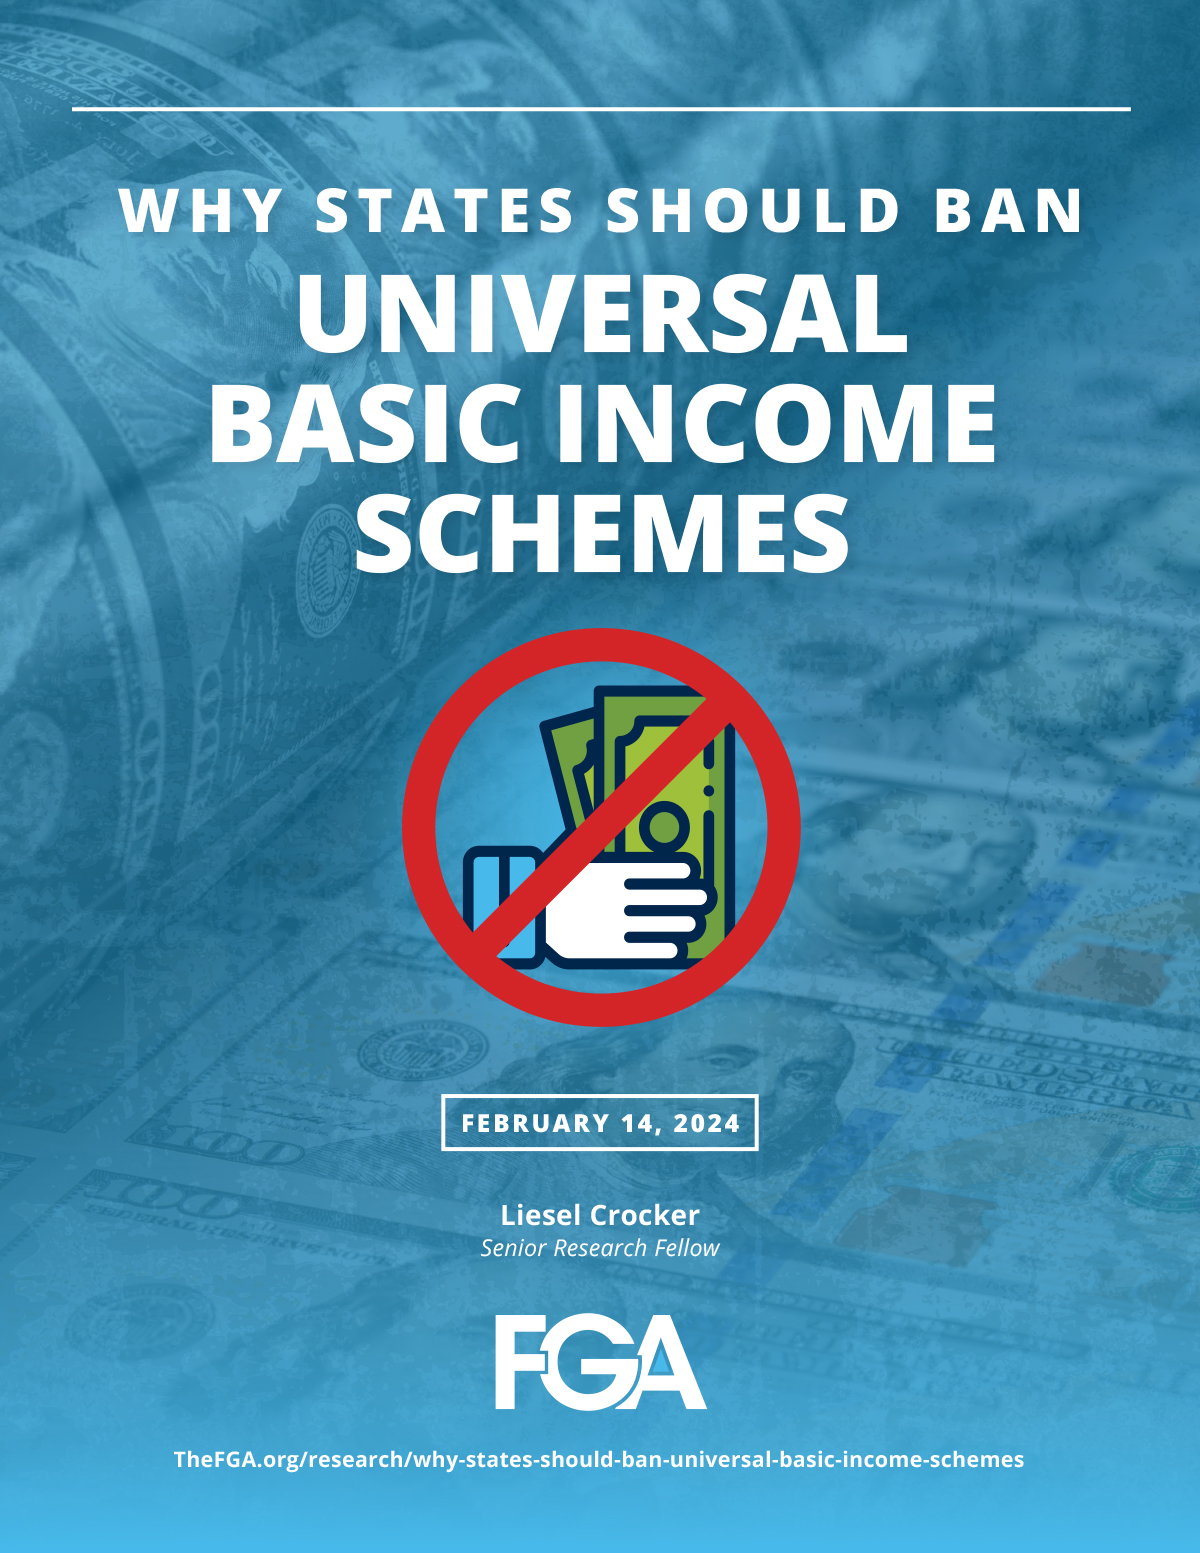 Why States Should Ban Universal Basic Income Schemes